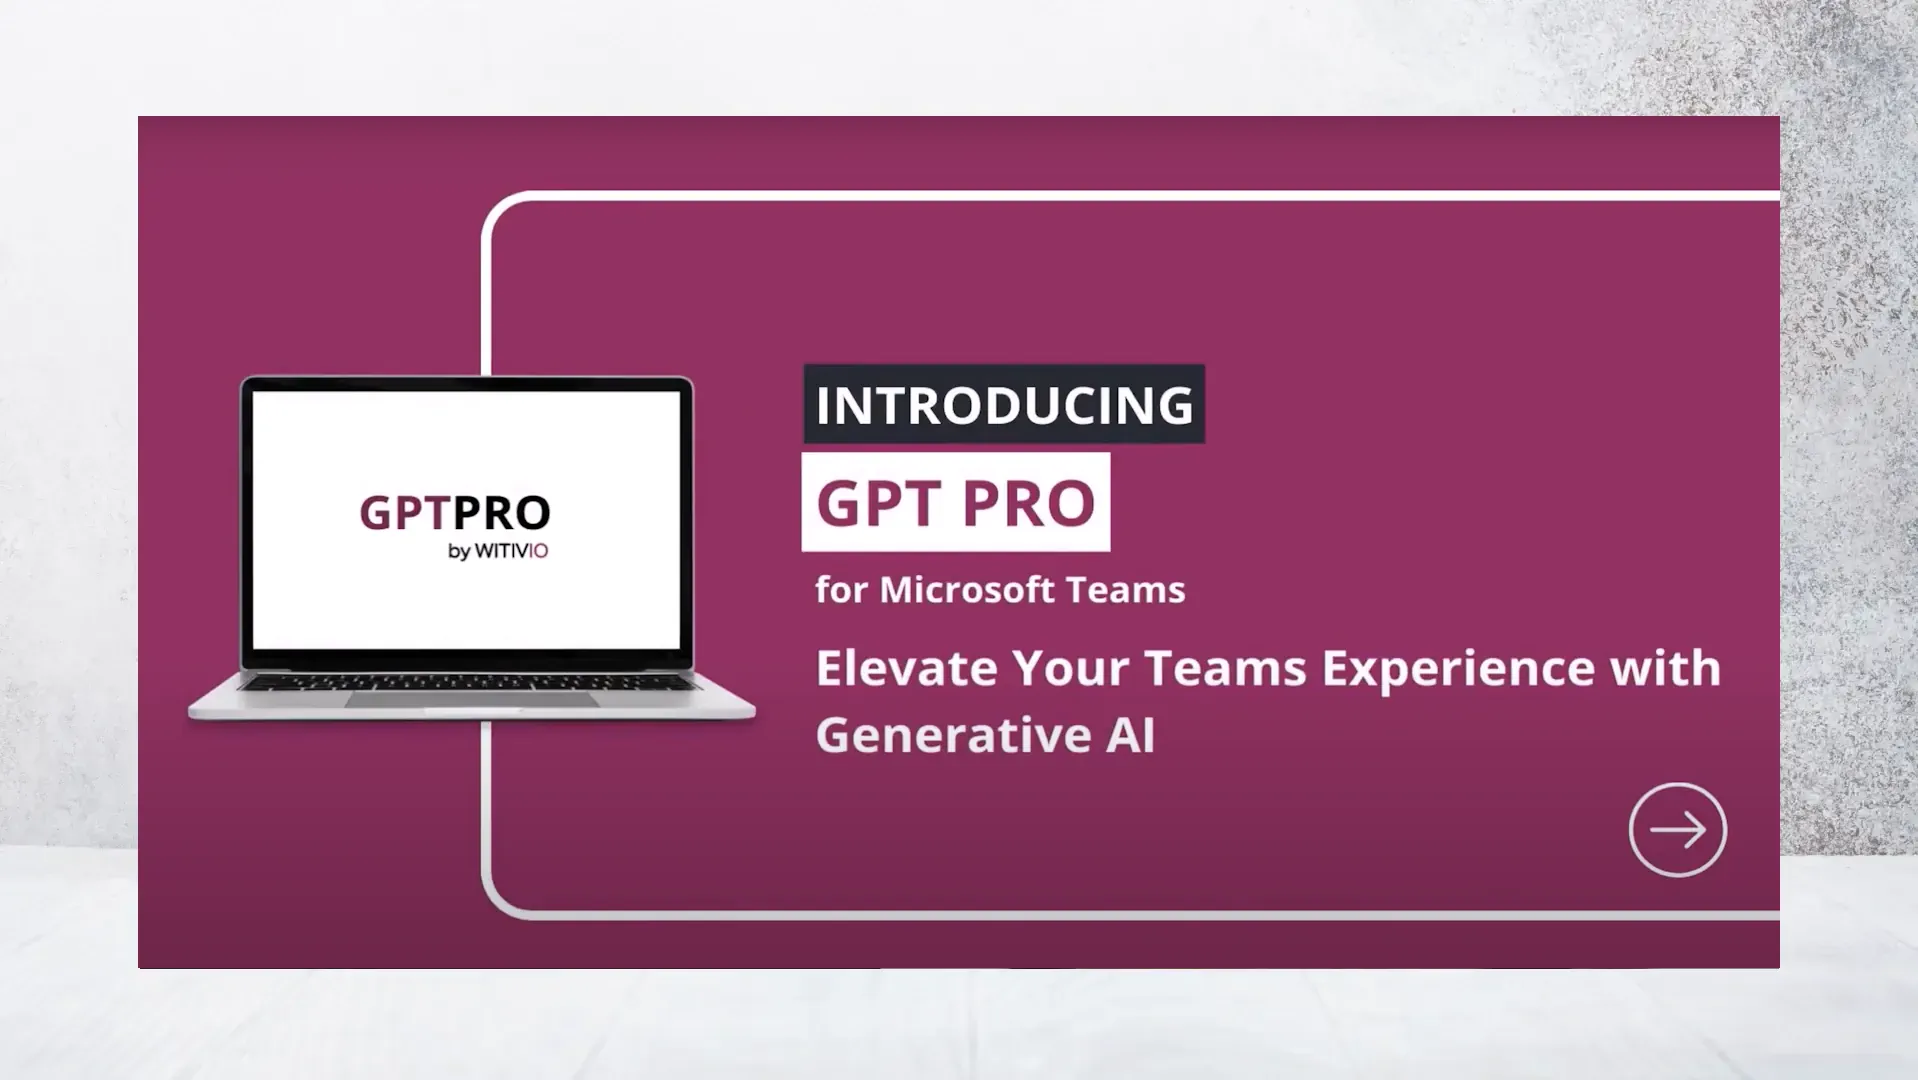 GPT Pro for Microsoft Teams